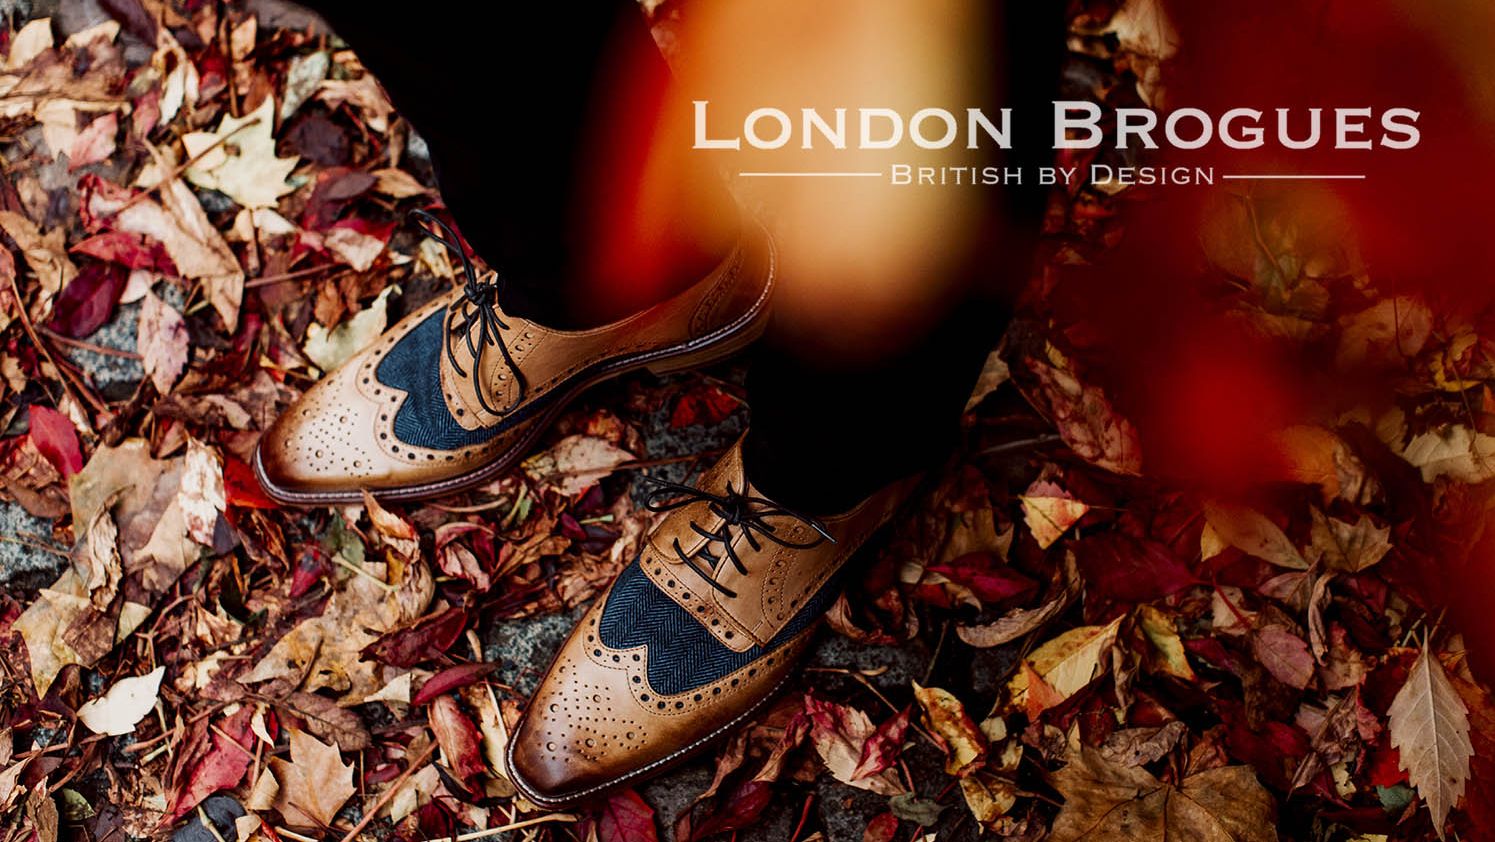 London Brogues – British by Design